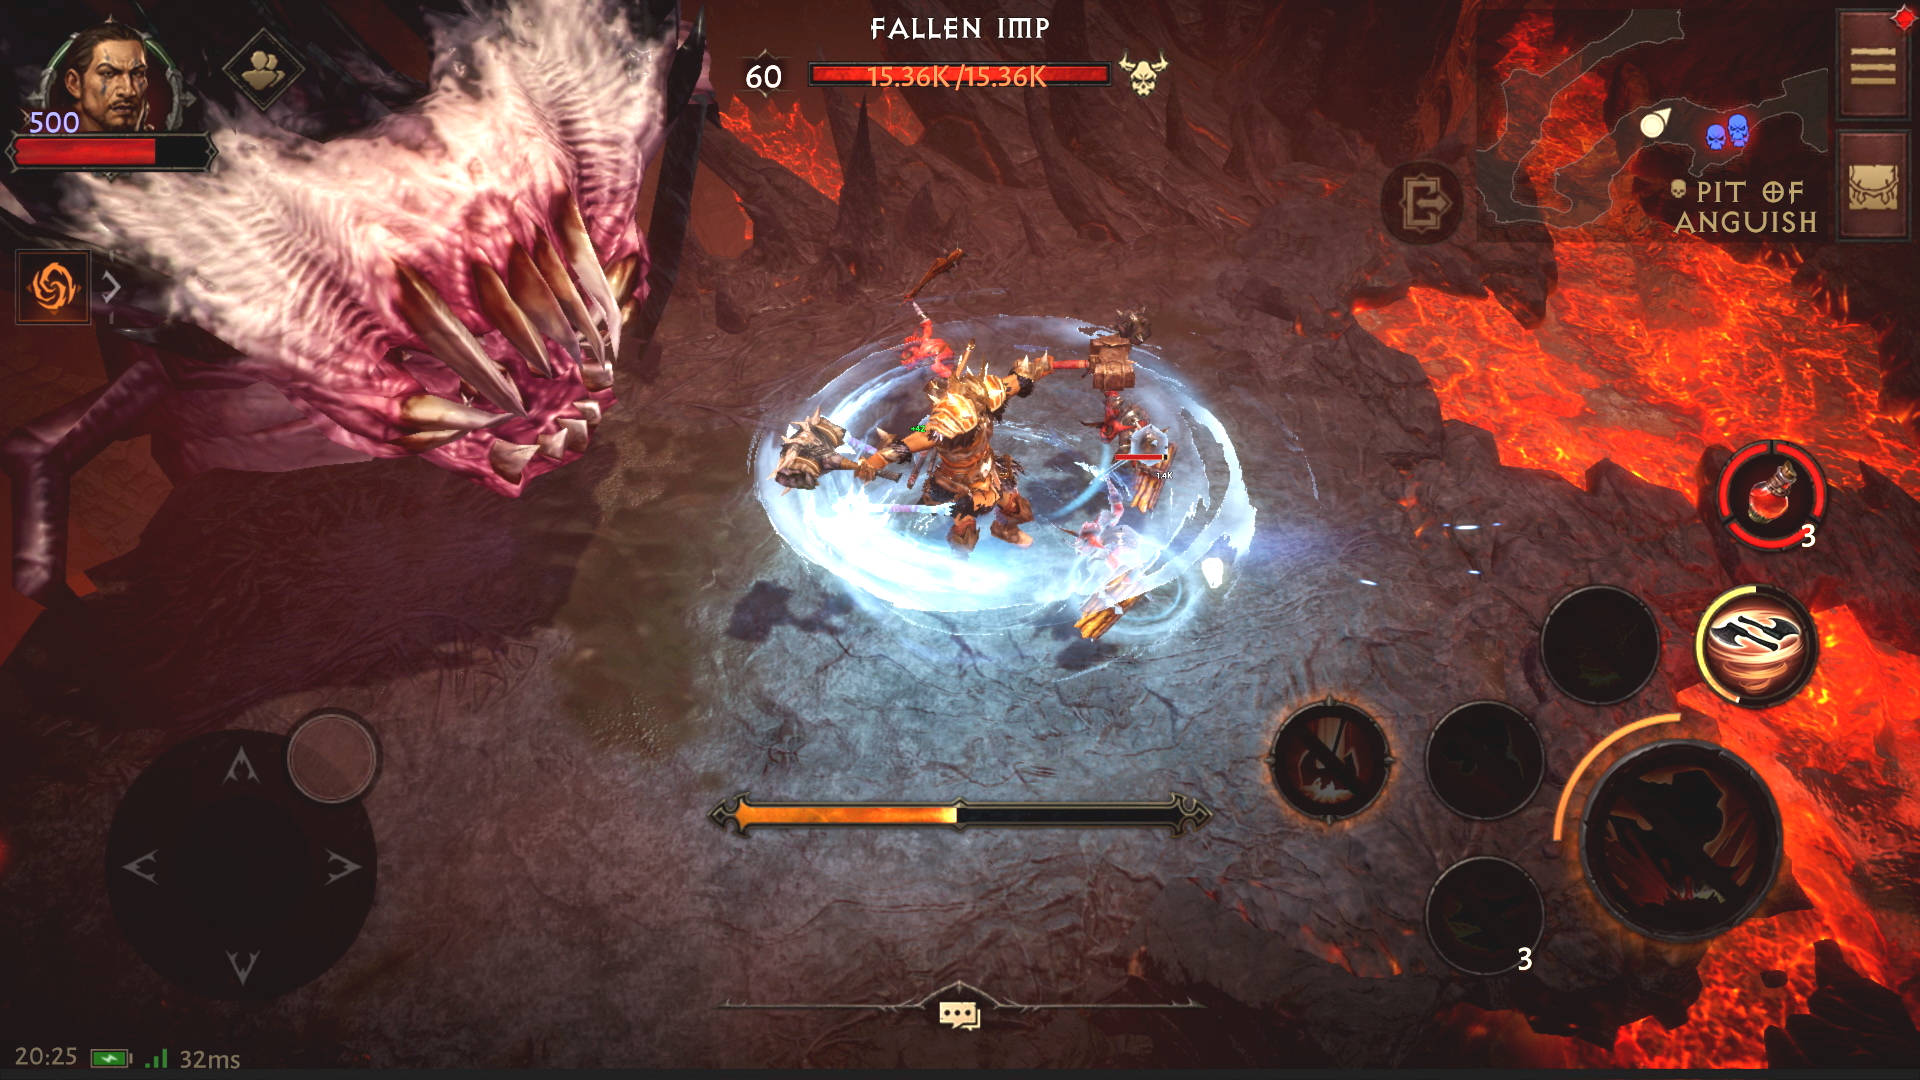 Best Diablo Immortal items: a Barbarian spinning around with his hammers in hand, smacking some imps while a demon bares its teeth.